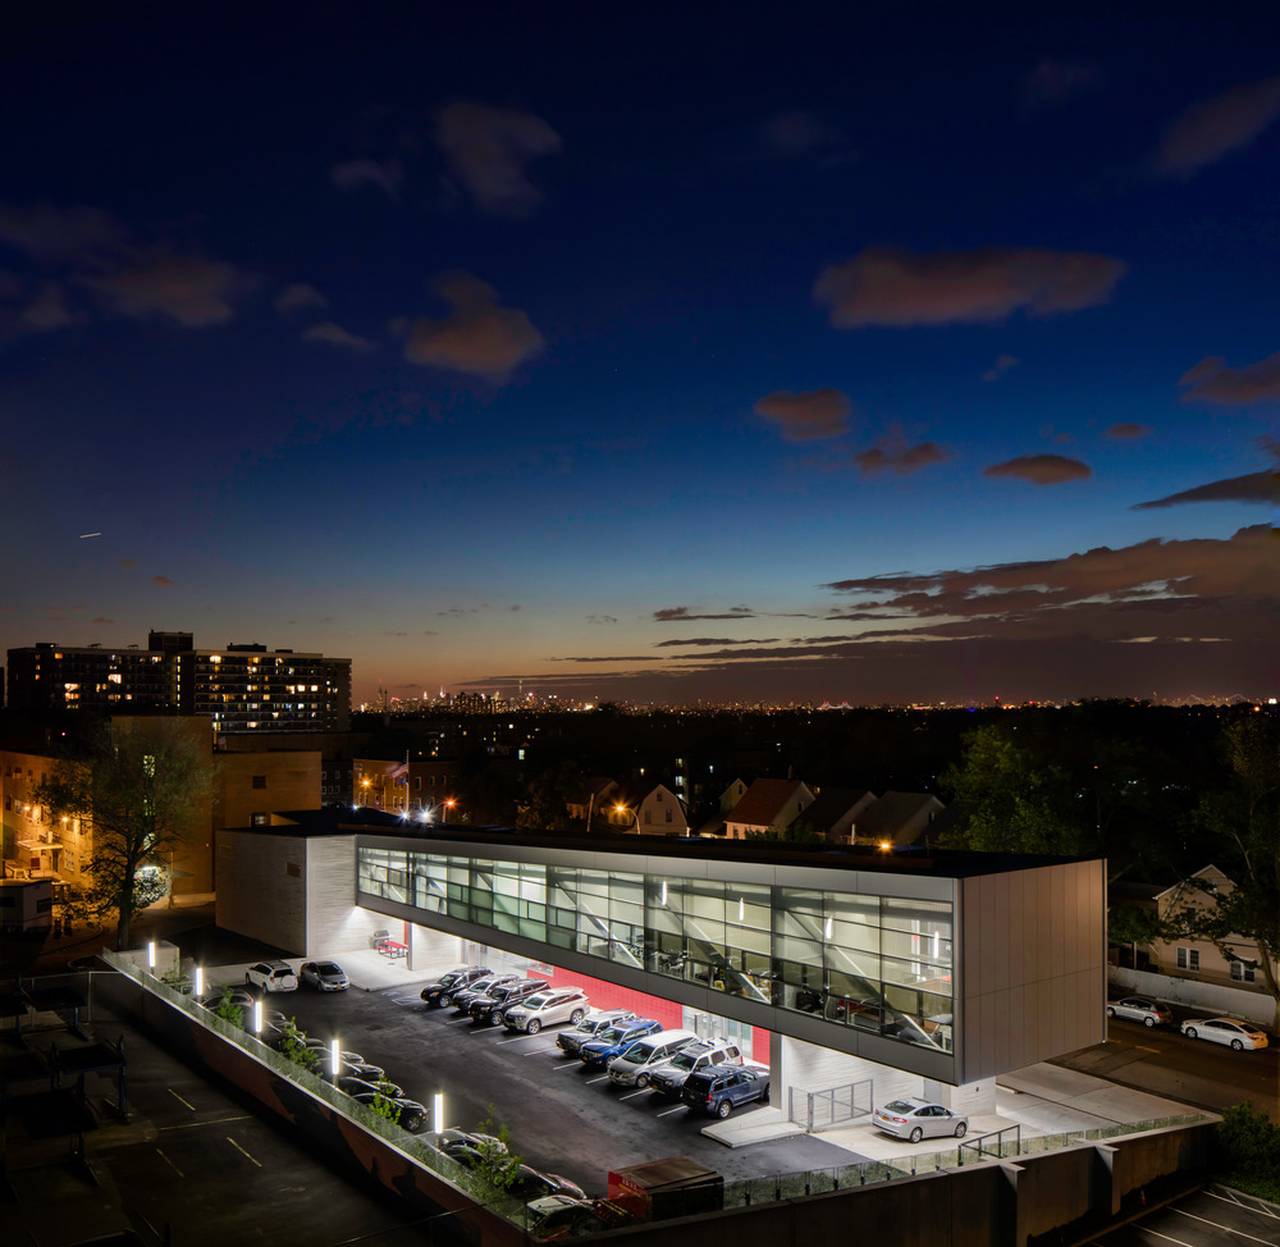 The 24 hour facility is a beacon for the neighborhood : Photo credit © Paul Warchol